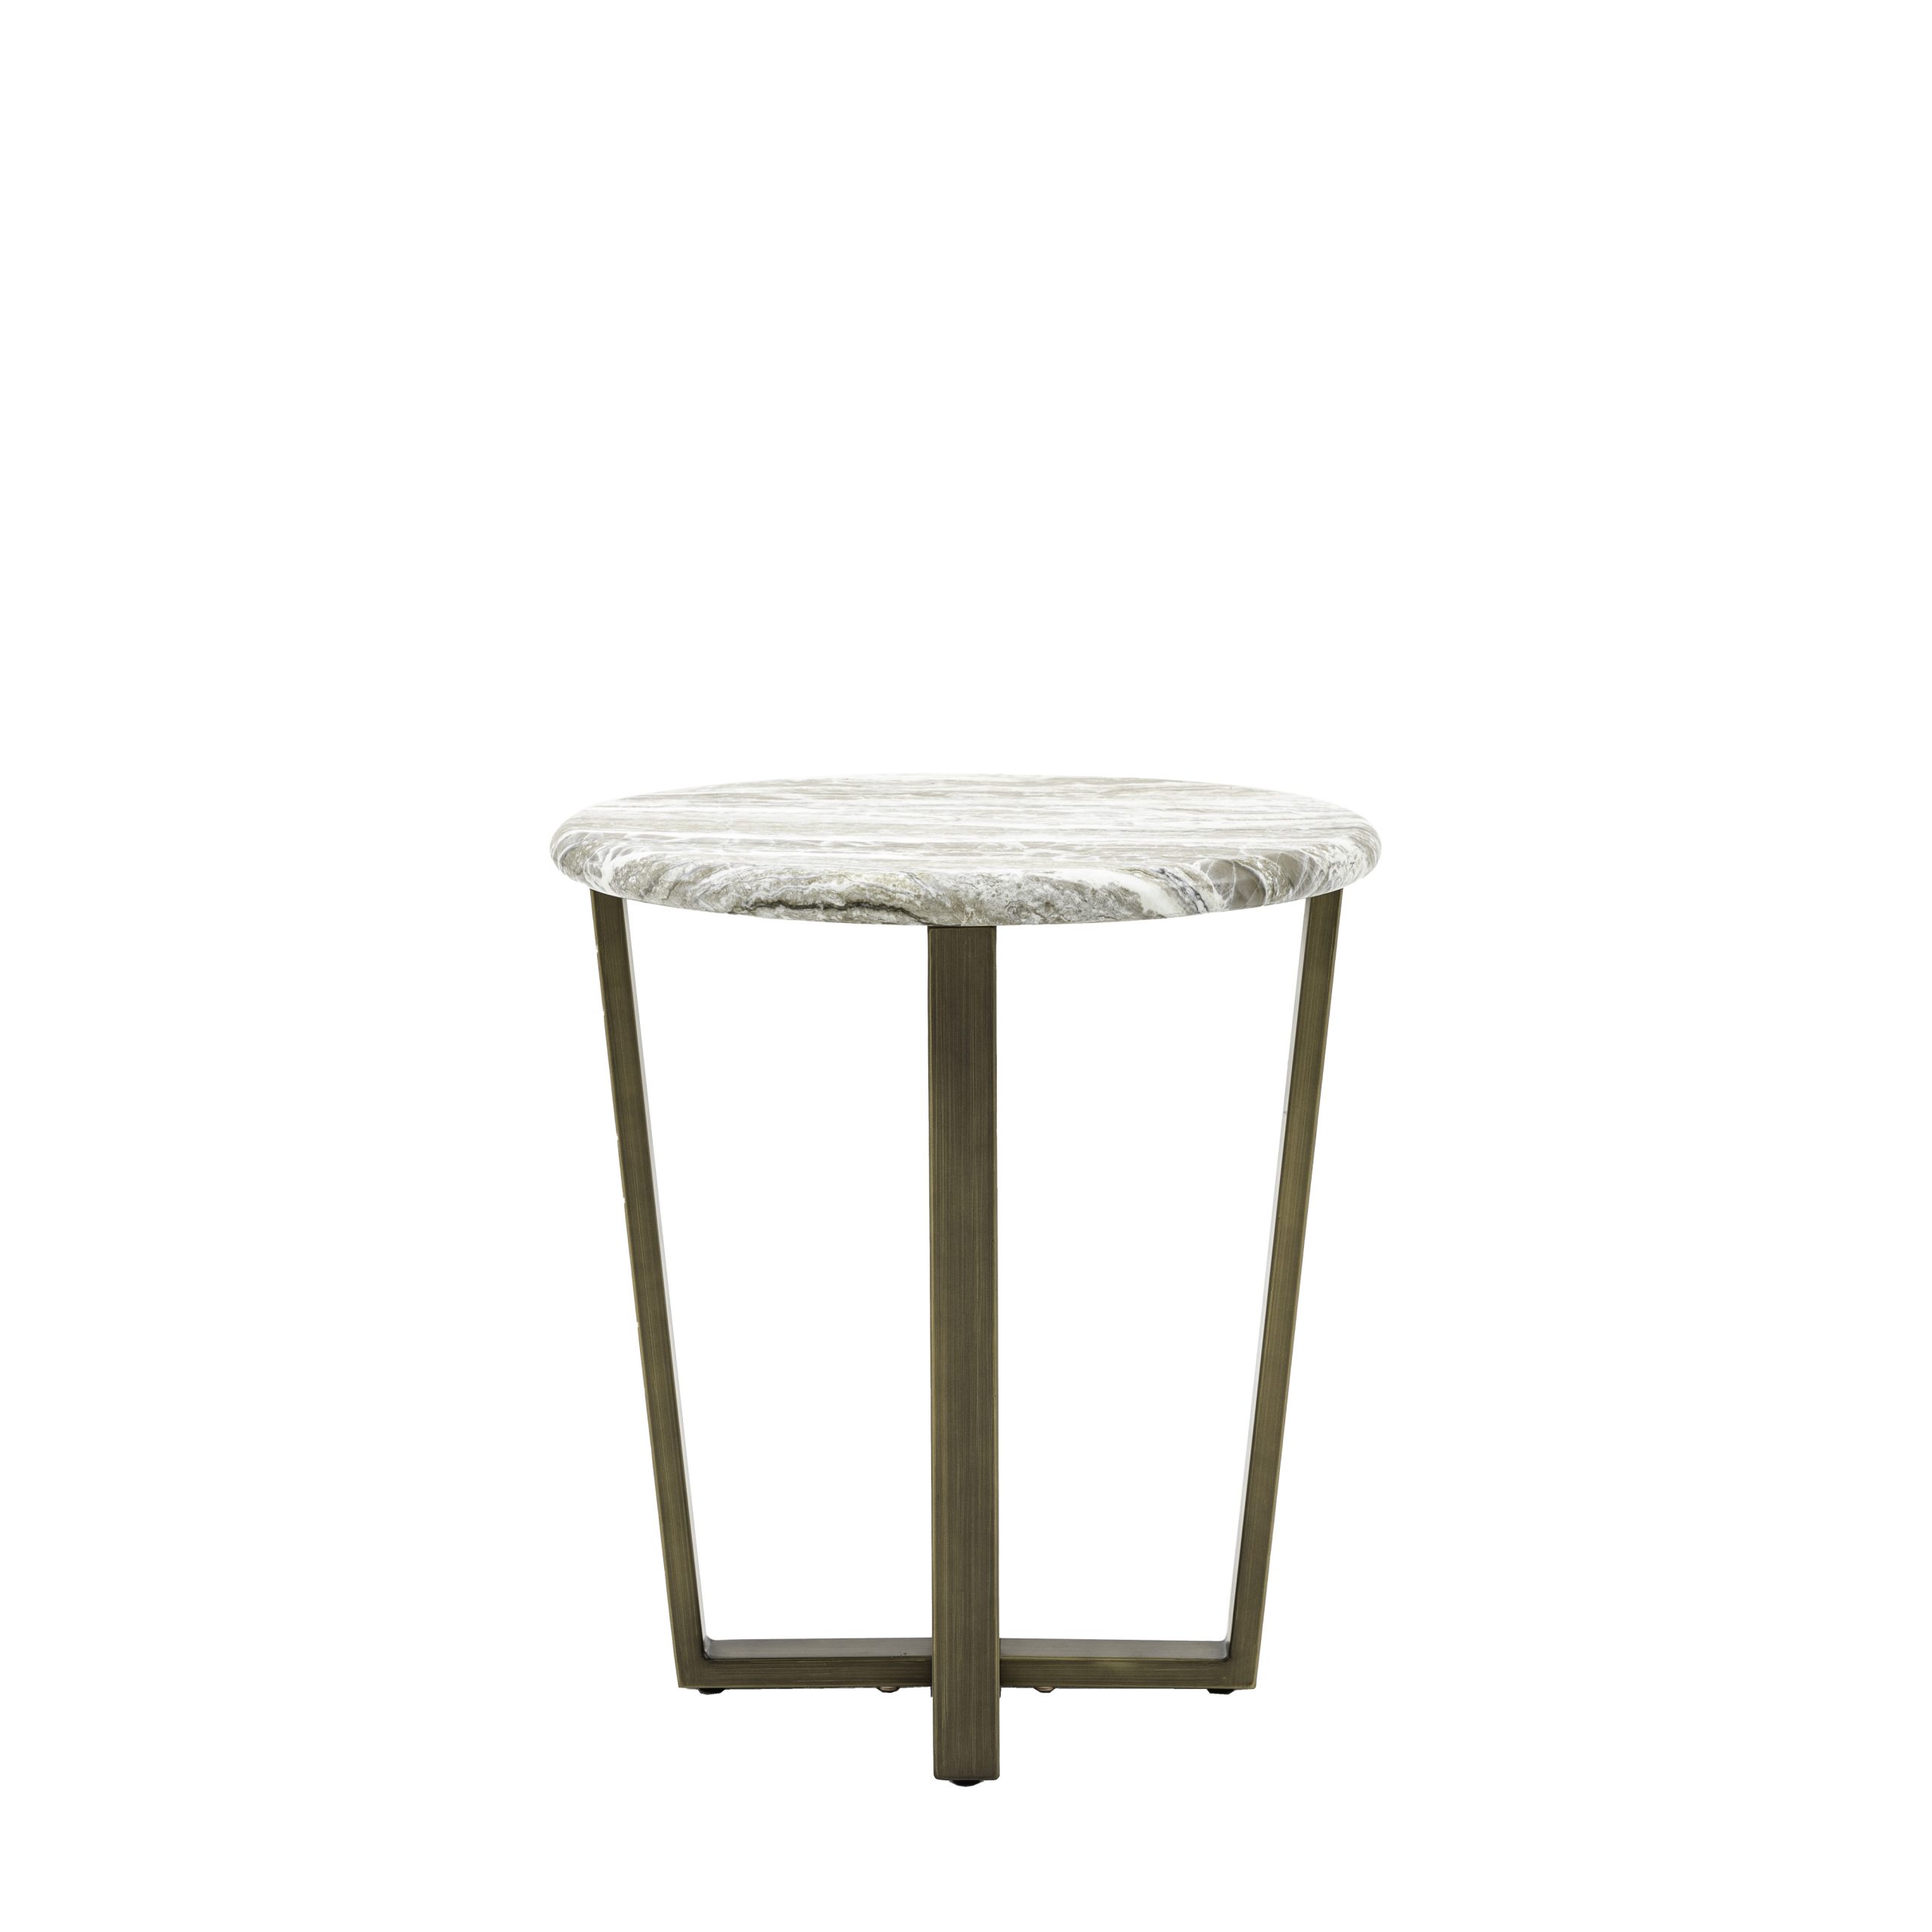 Gallery Direct Lusso Side Table